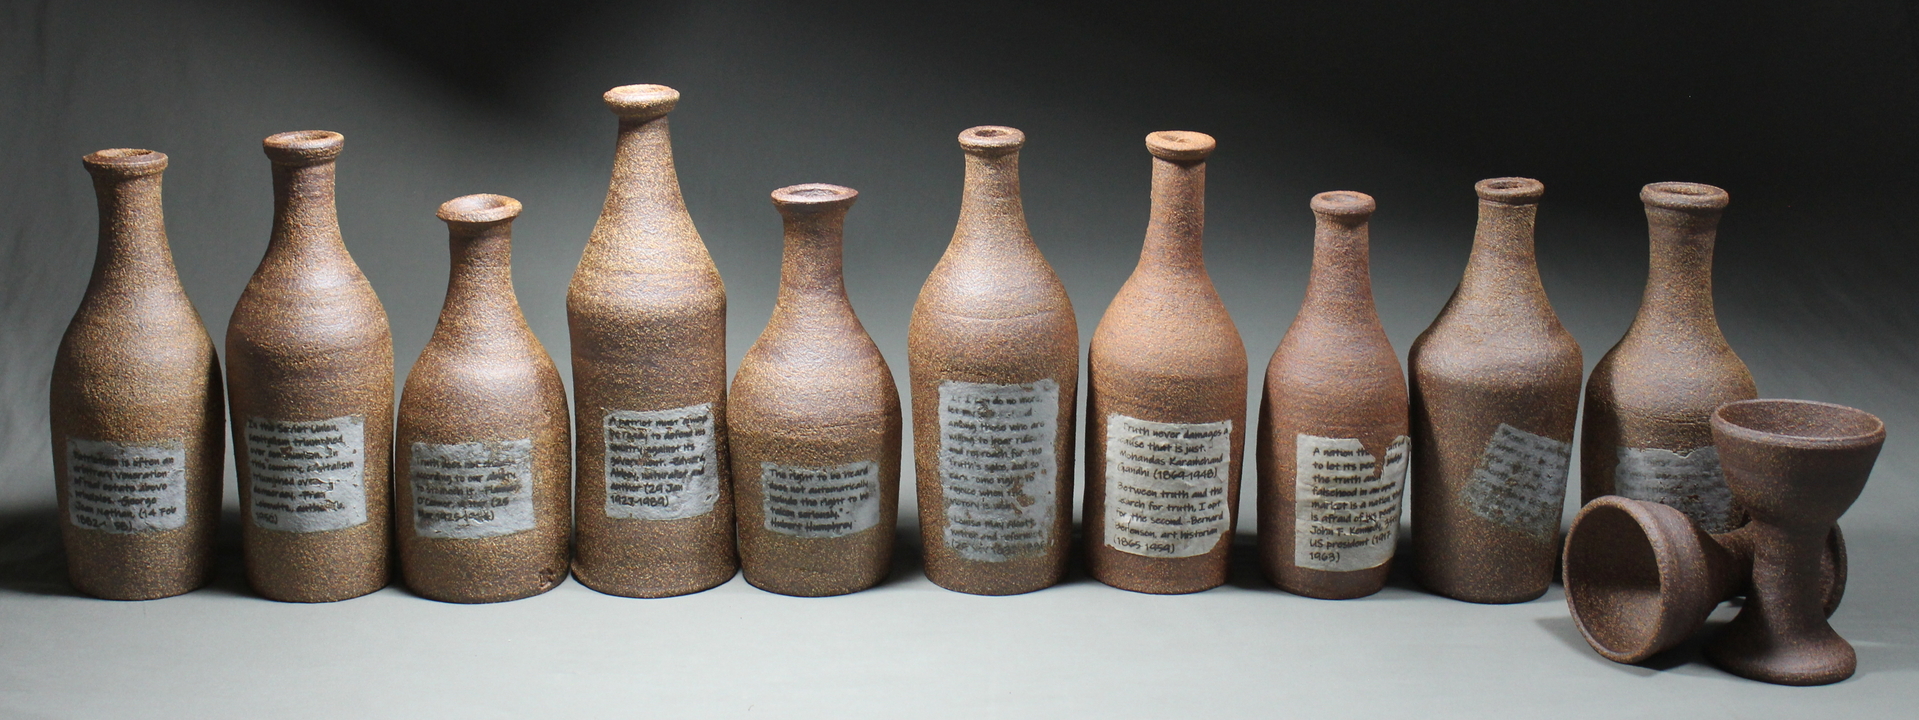 Marie Nagy created stoneware bottles with text lables for permanently preserving thoughts and ideas.